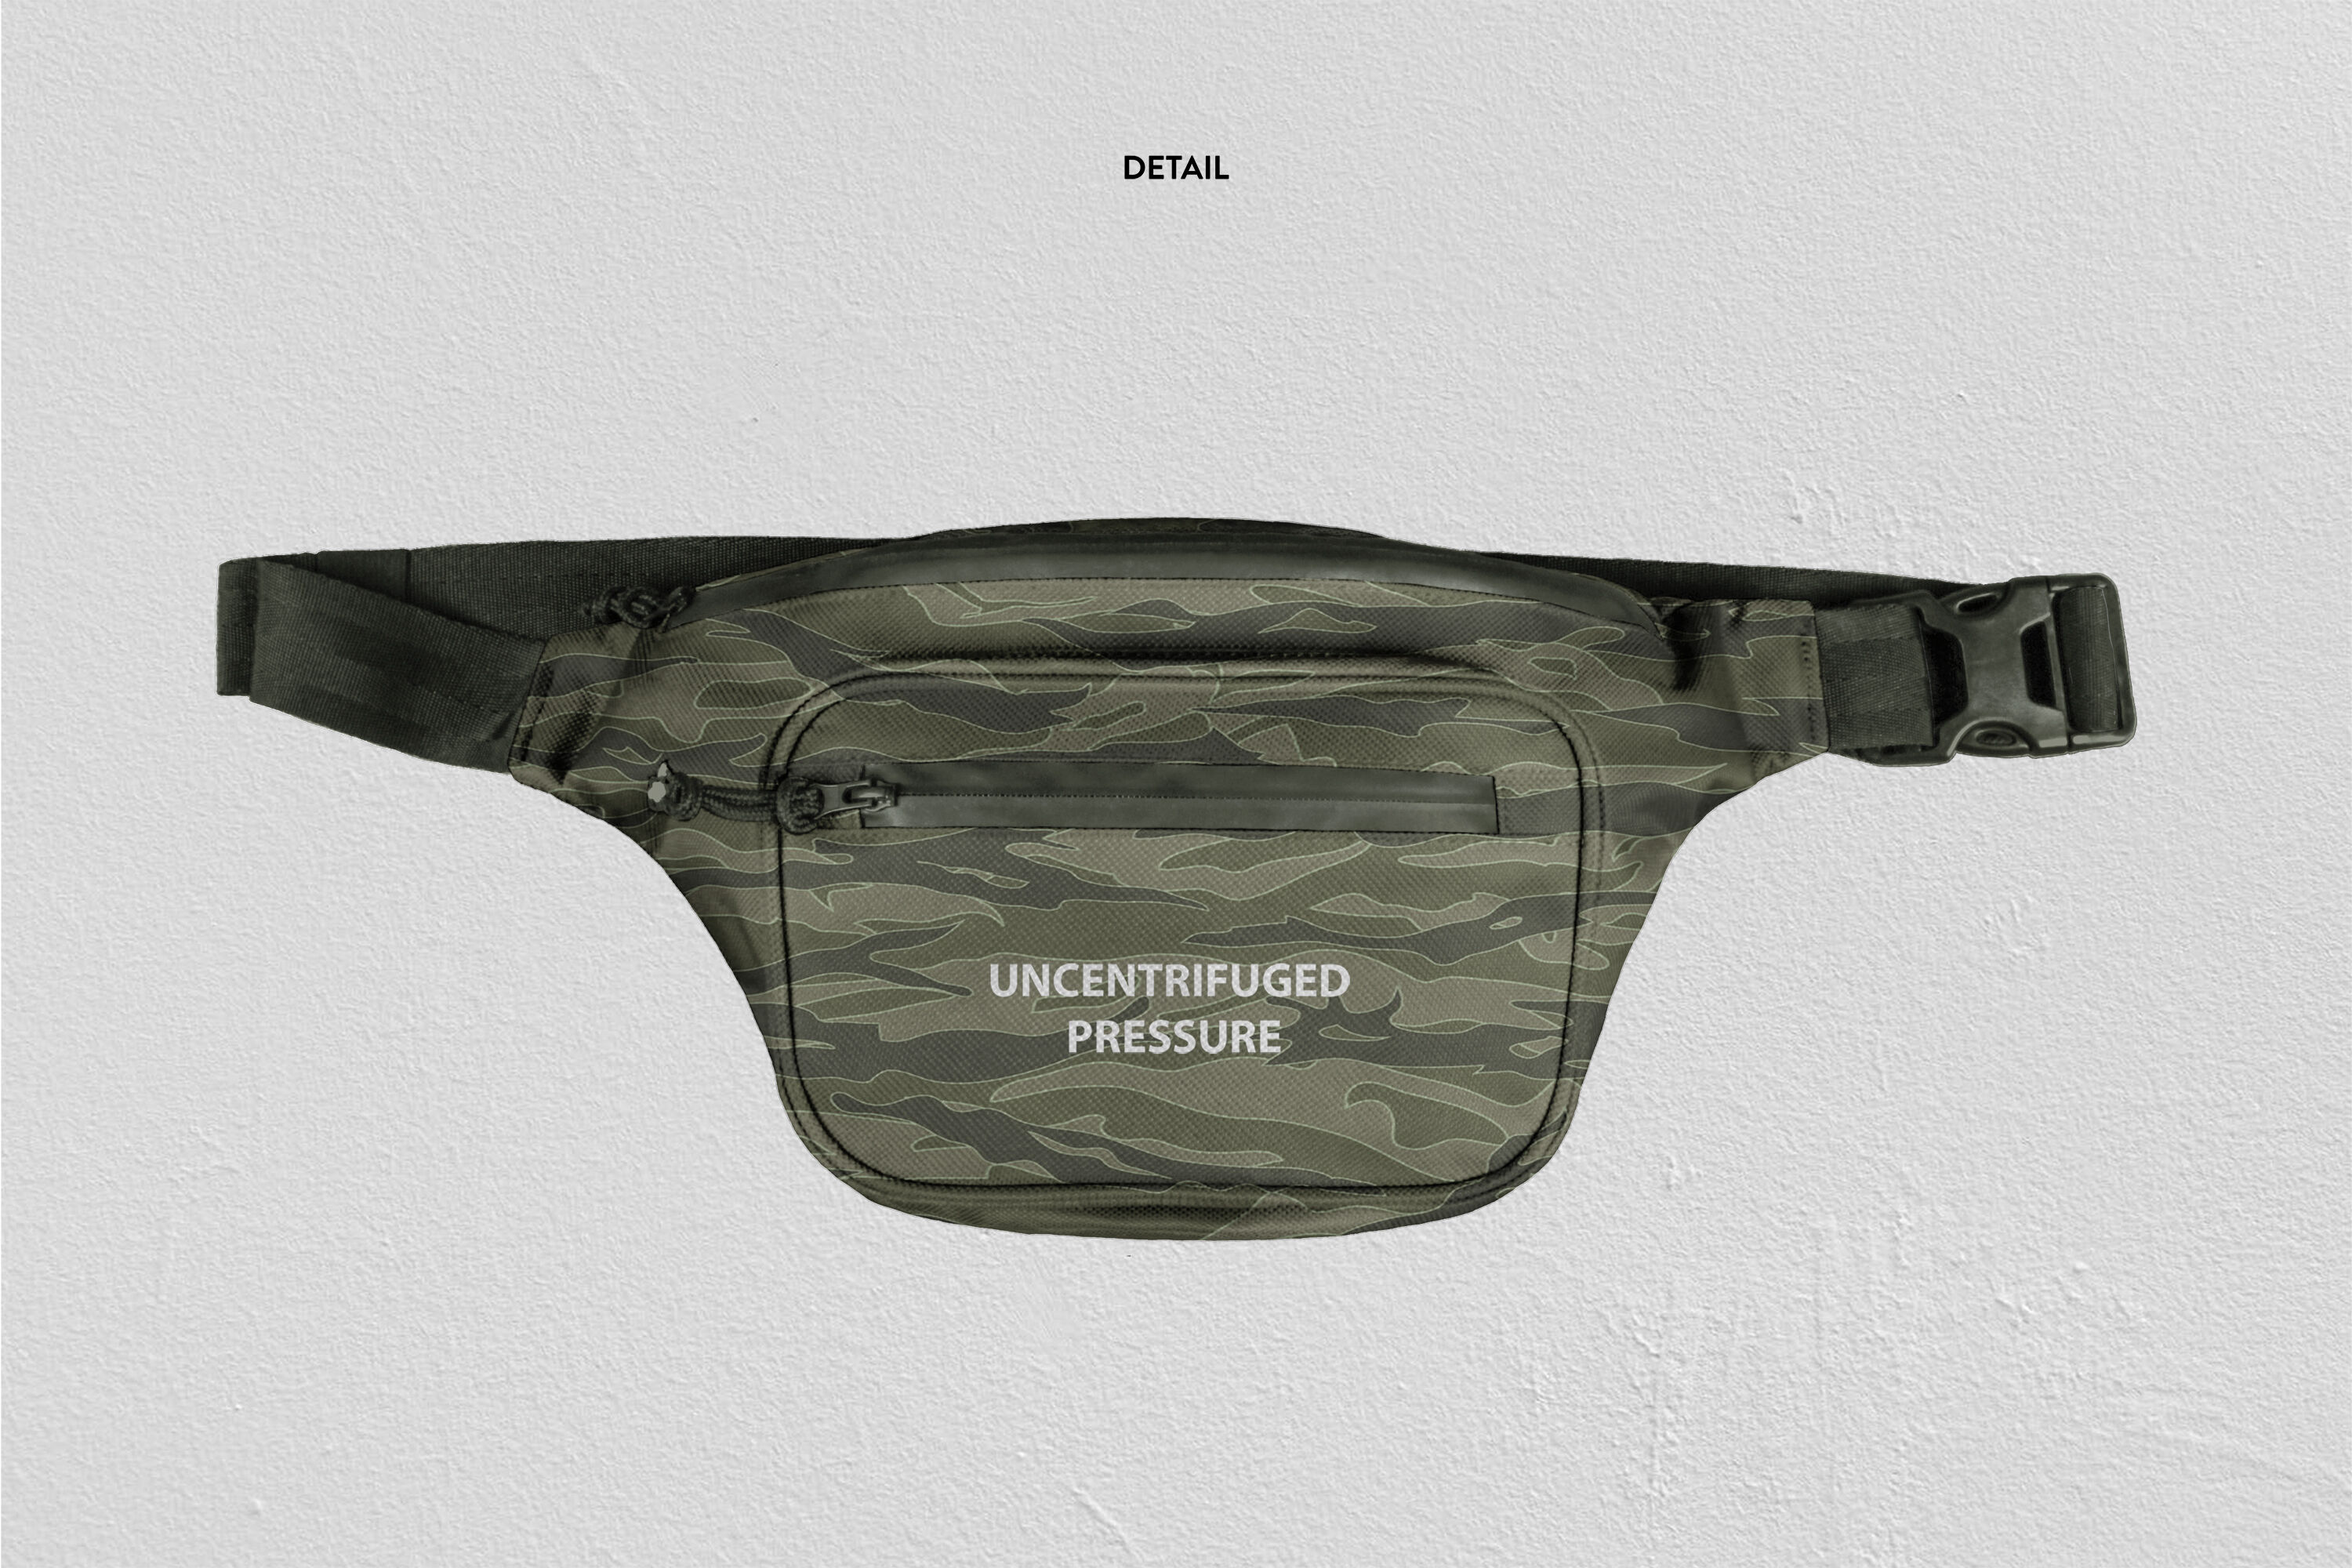 Download Fanny Pack Mockup Psd - Free Mockups | PSD Template ...